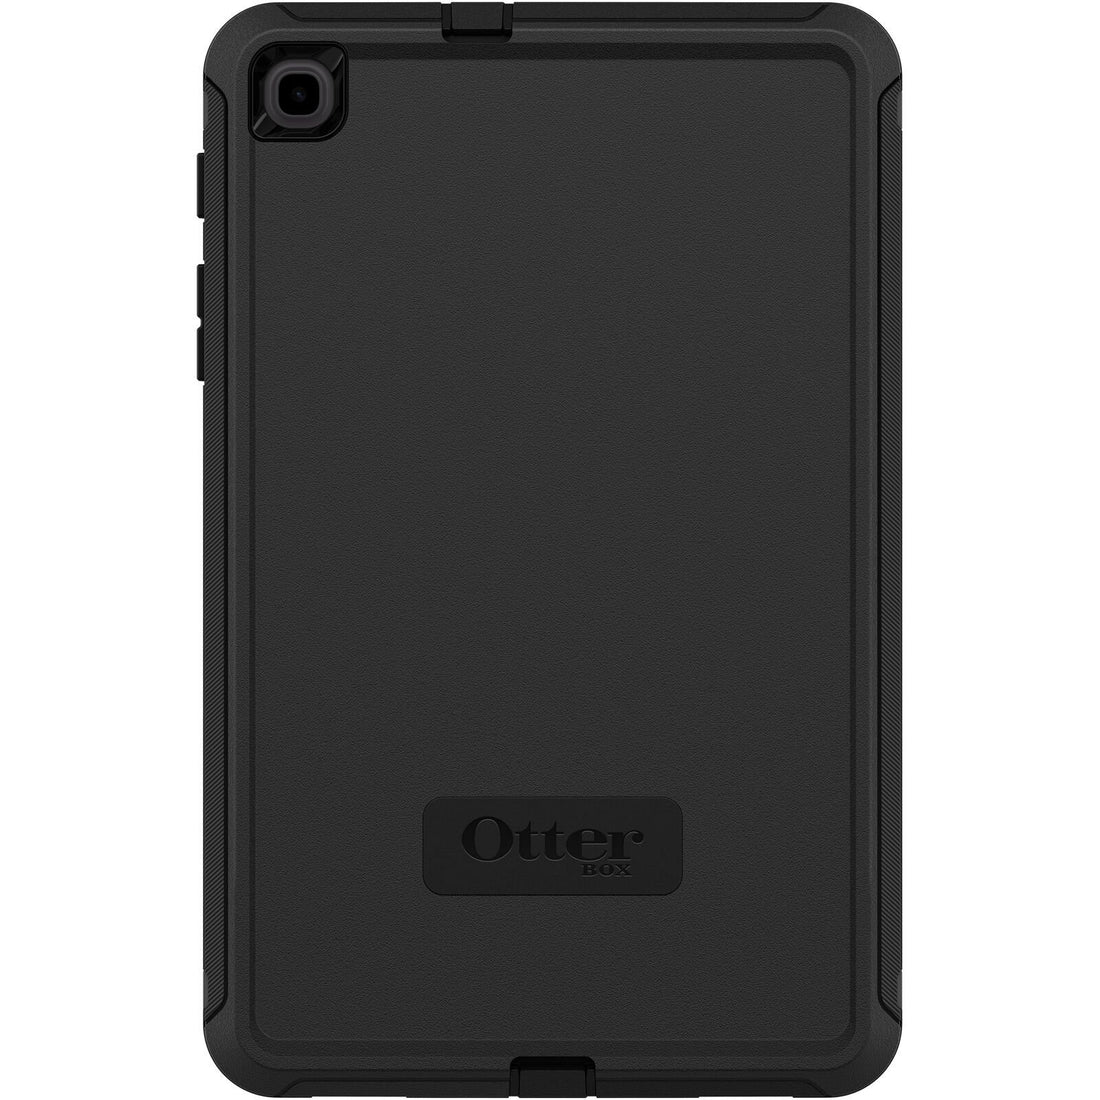 OtterBox DEFENDER SERIES Case for Samsung Galaxy Tab A 8.4 - Black (New)